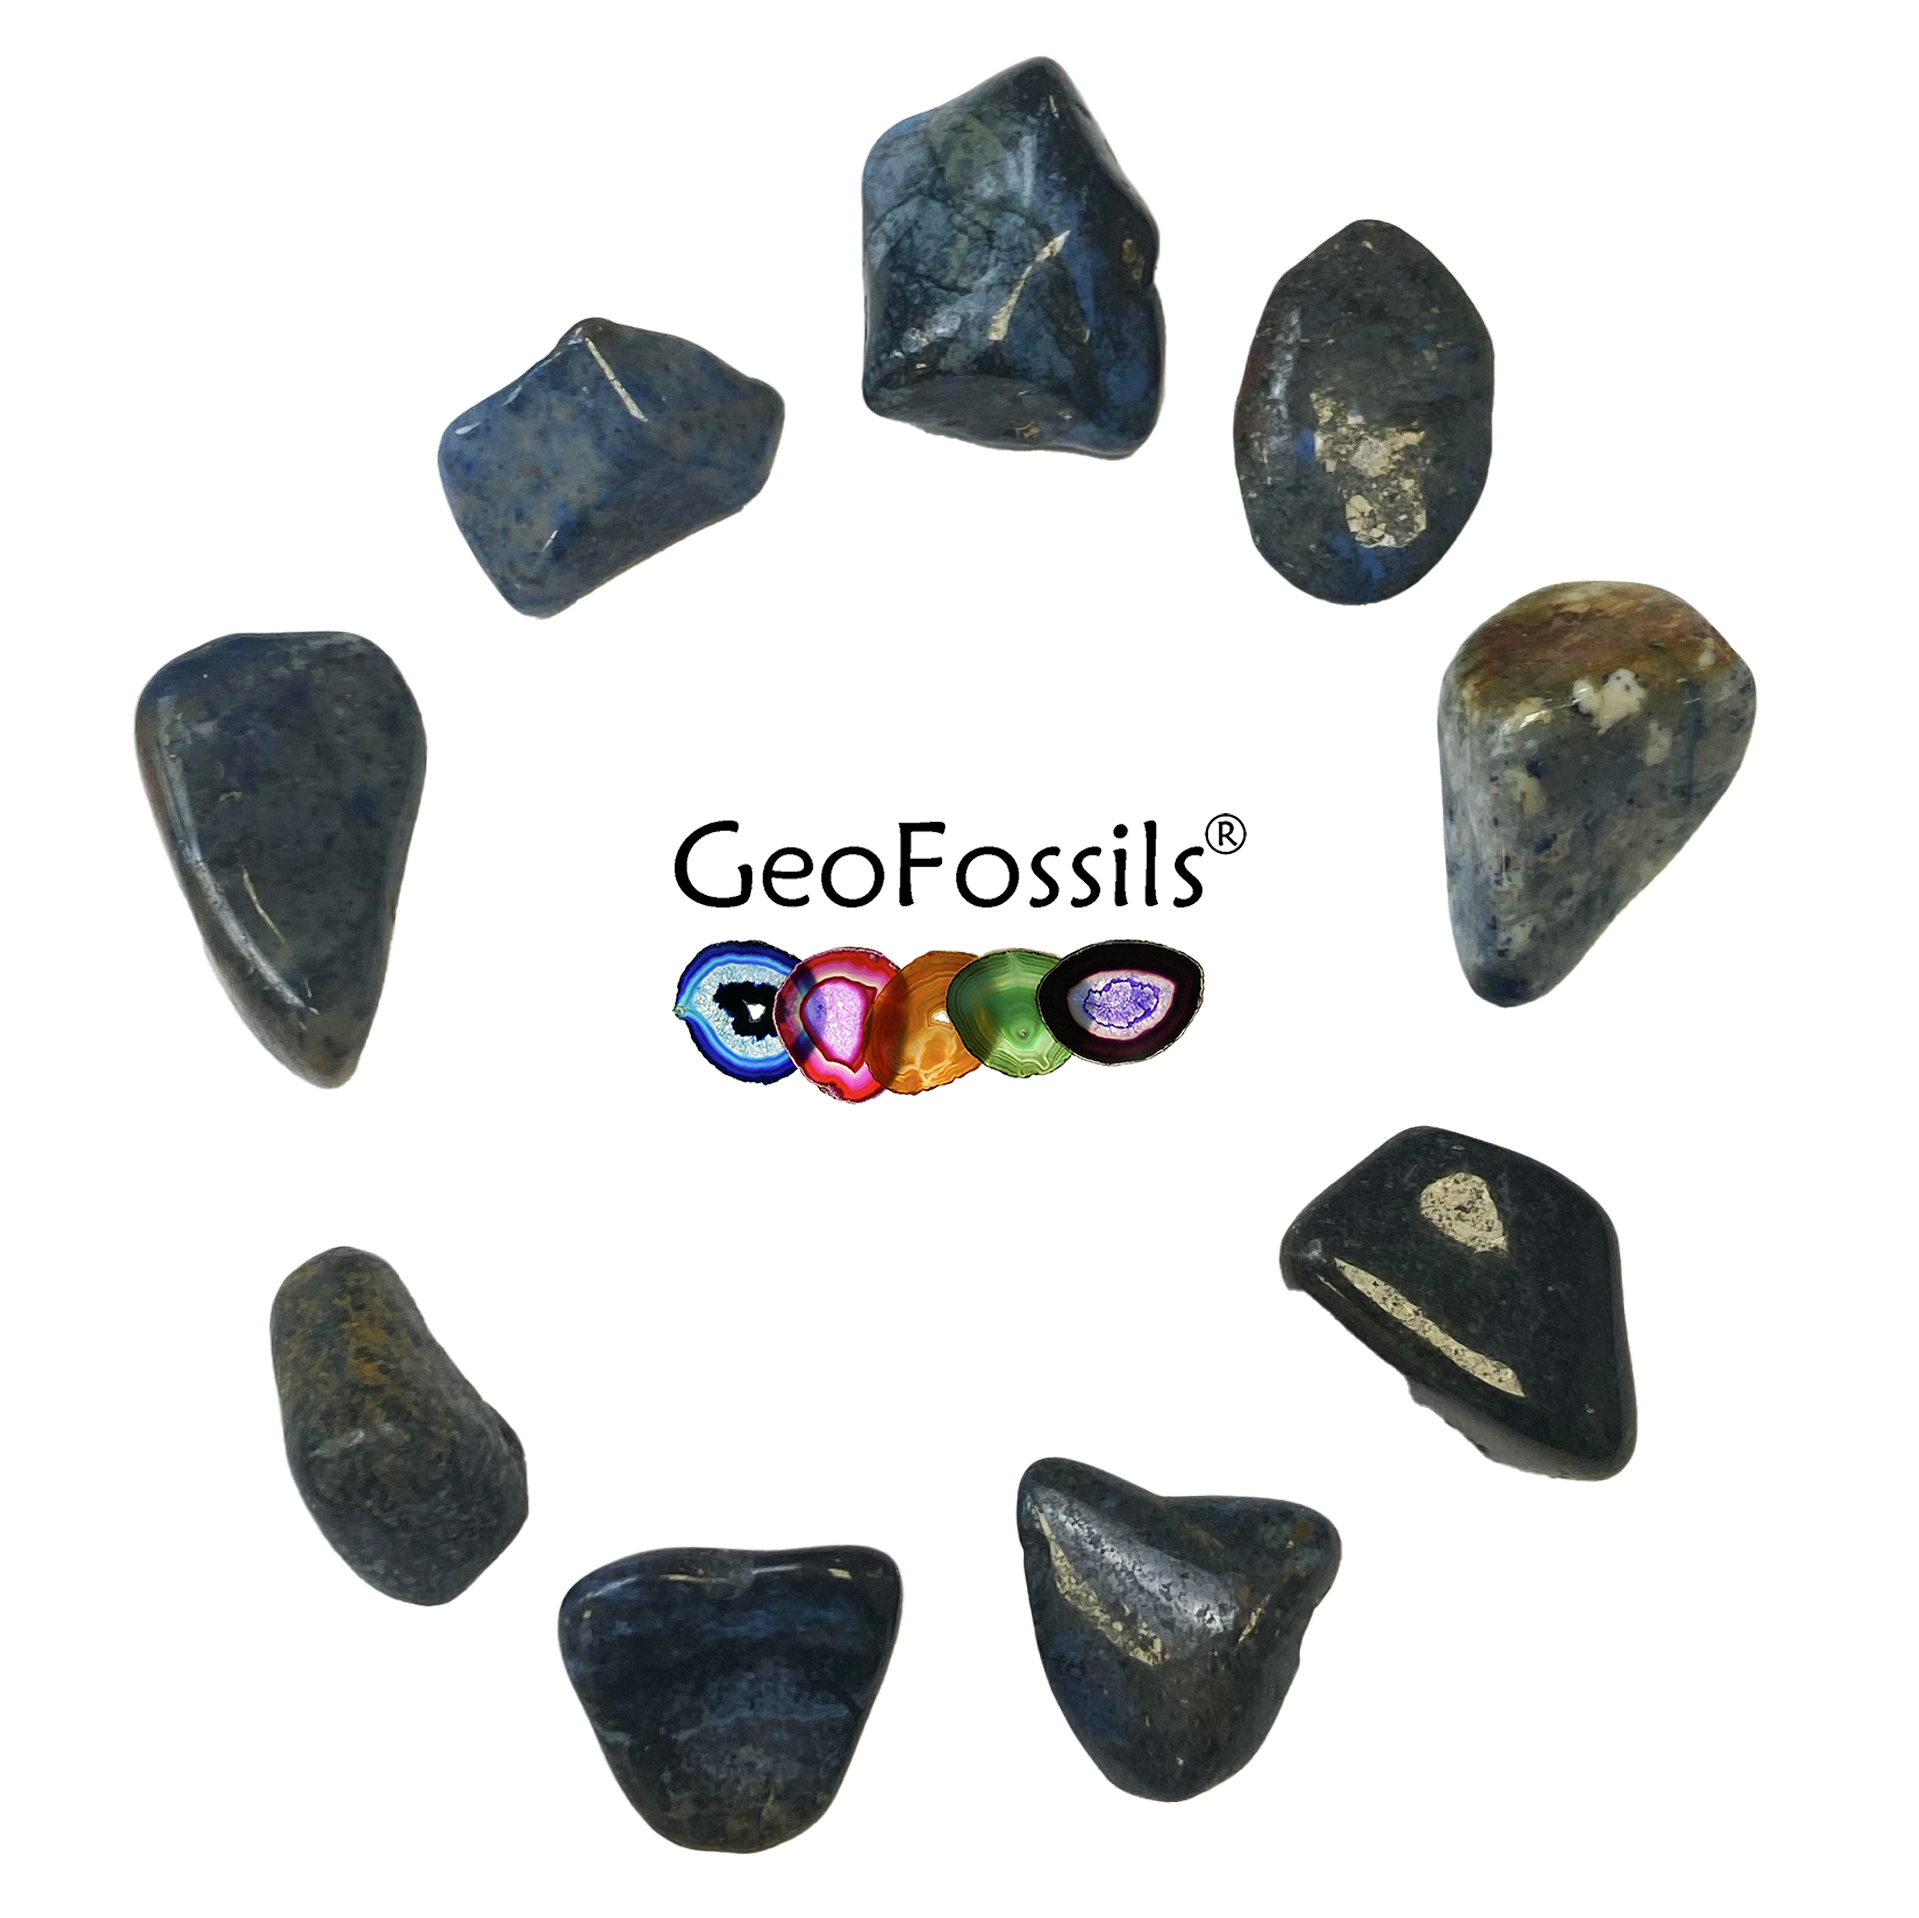 Dumortierite Geofossils Polished Tumble Stone Healing Crystals